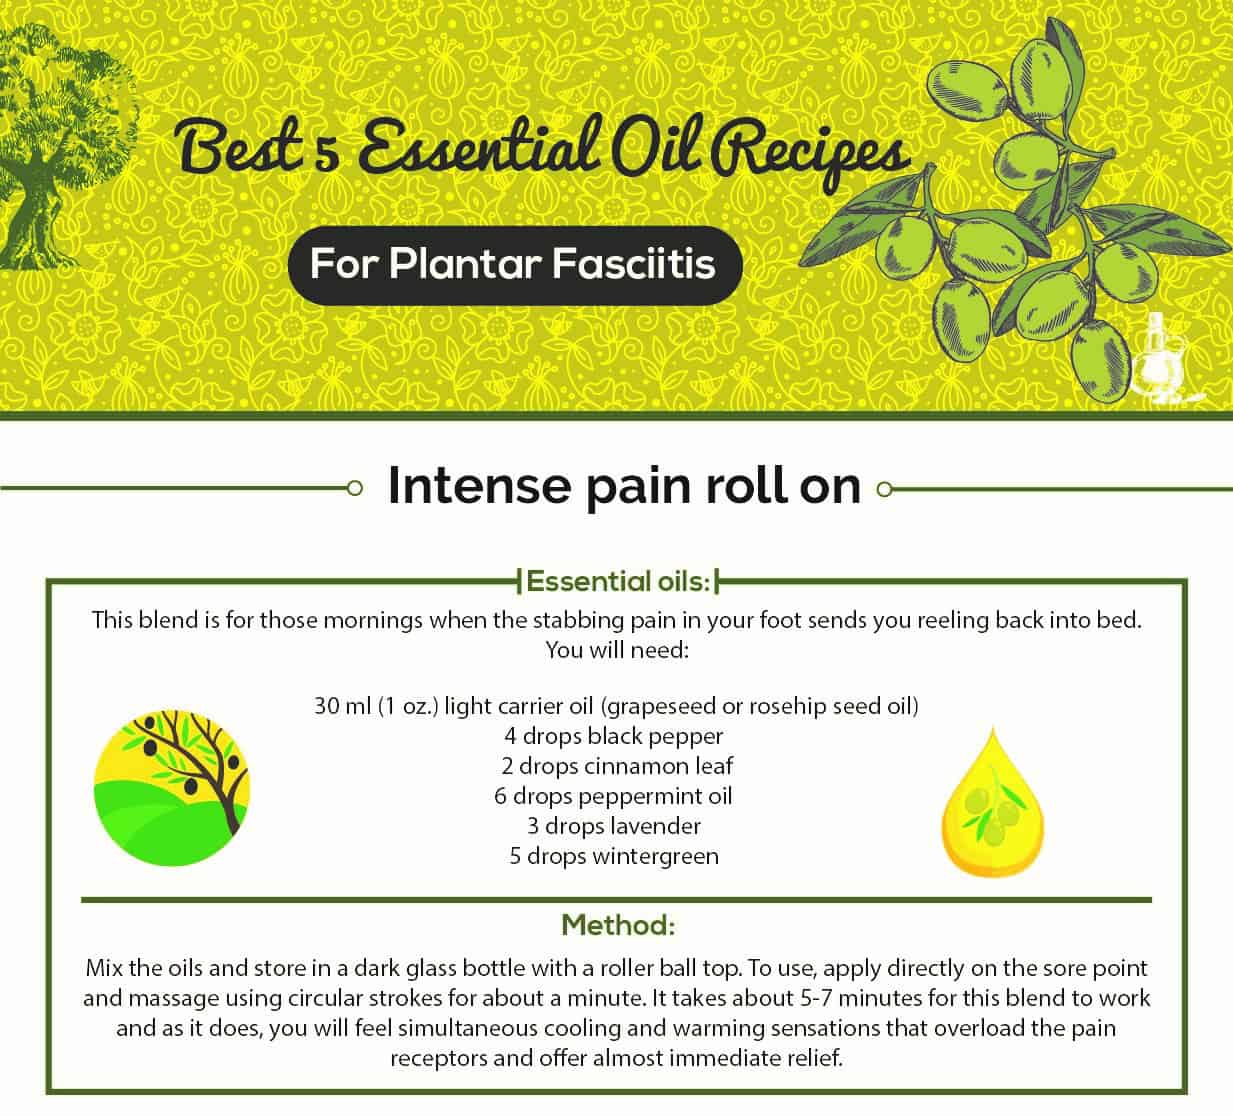 Essential Oils For Plantar Fasciitis: When Your Feet Start Protesting As Soon As You Take Your First Step of the Day! Essential Oil Benefits